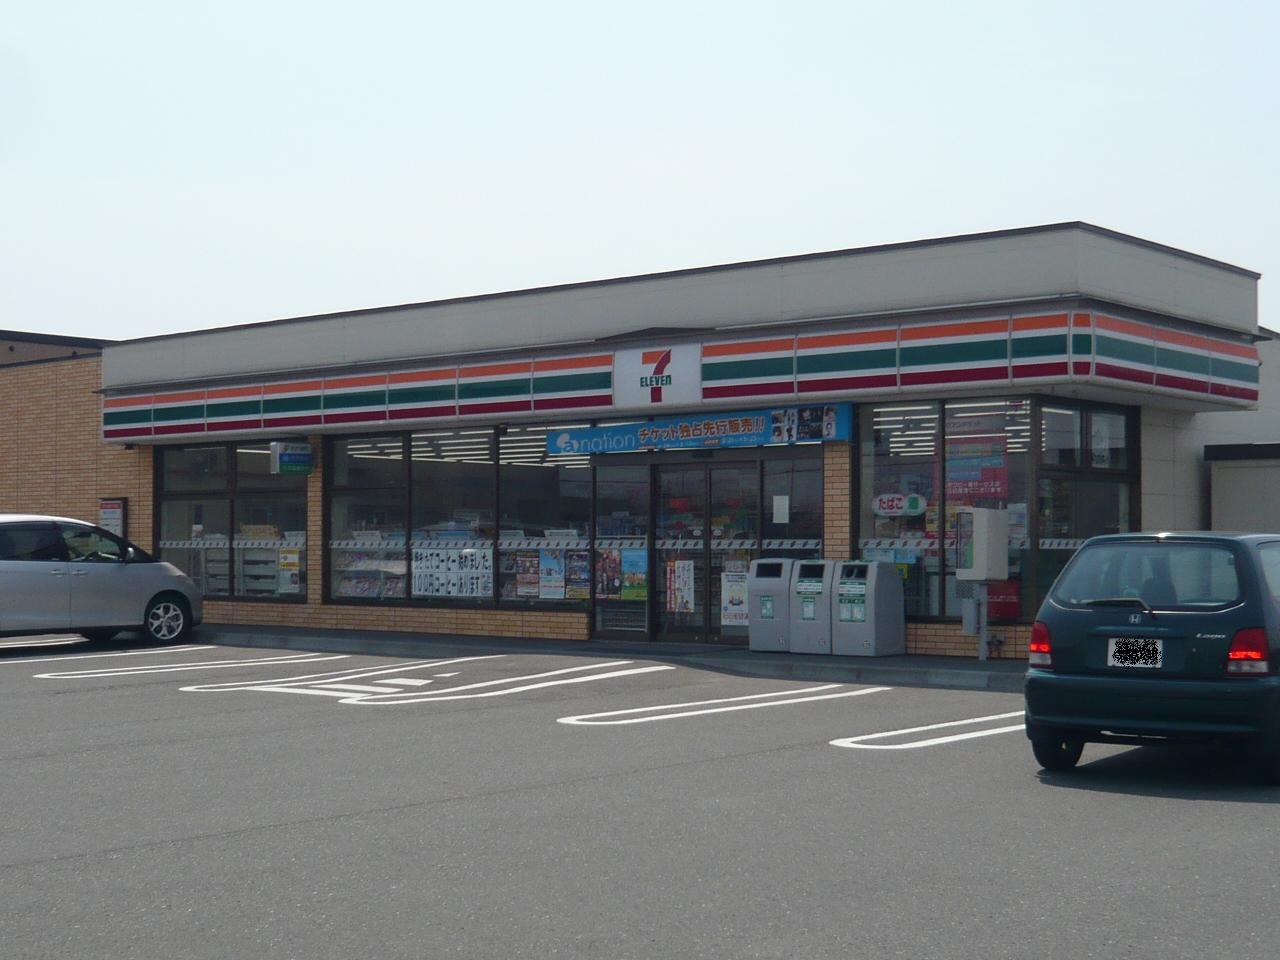 Convenience store. Seven-Eleven 299m to Tomakomai Numanohata Kitamise (convenience store)